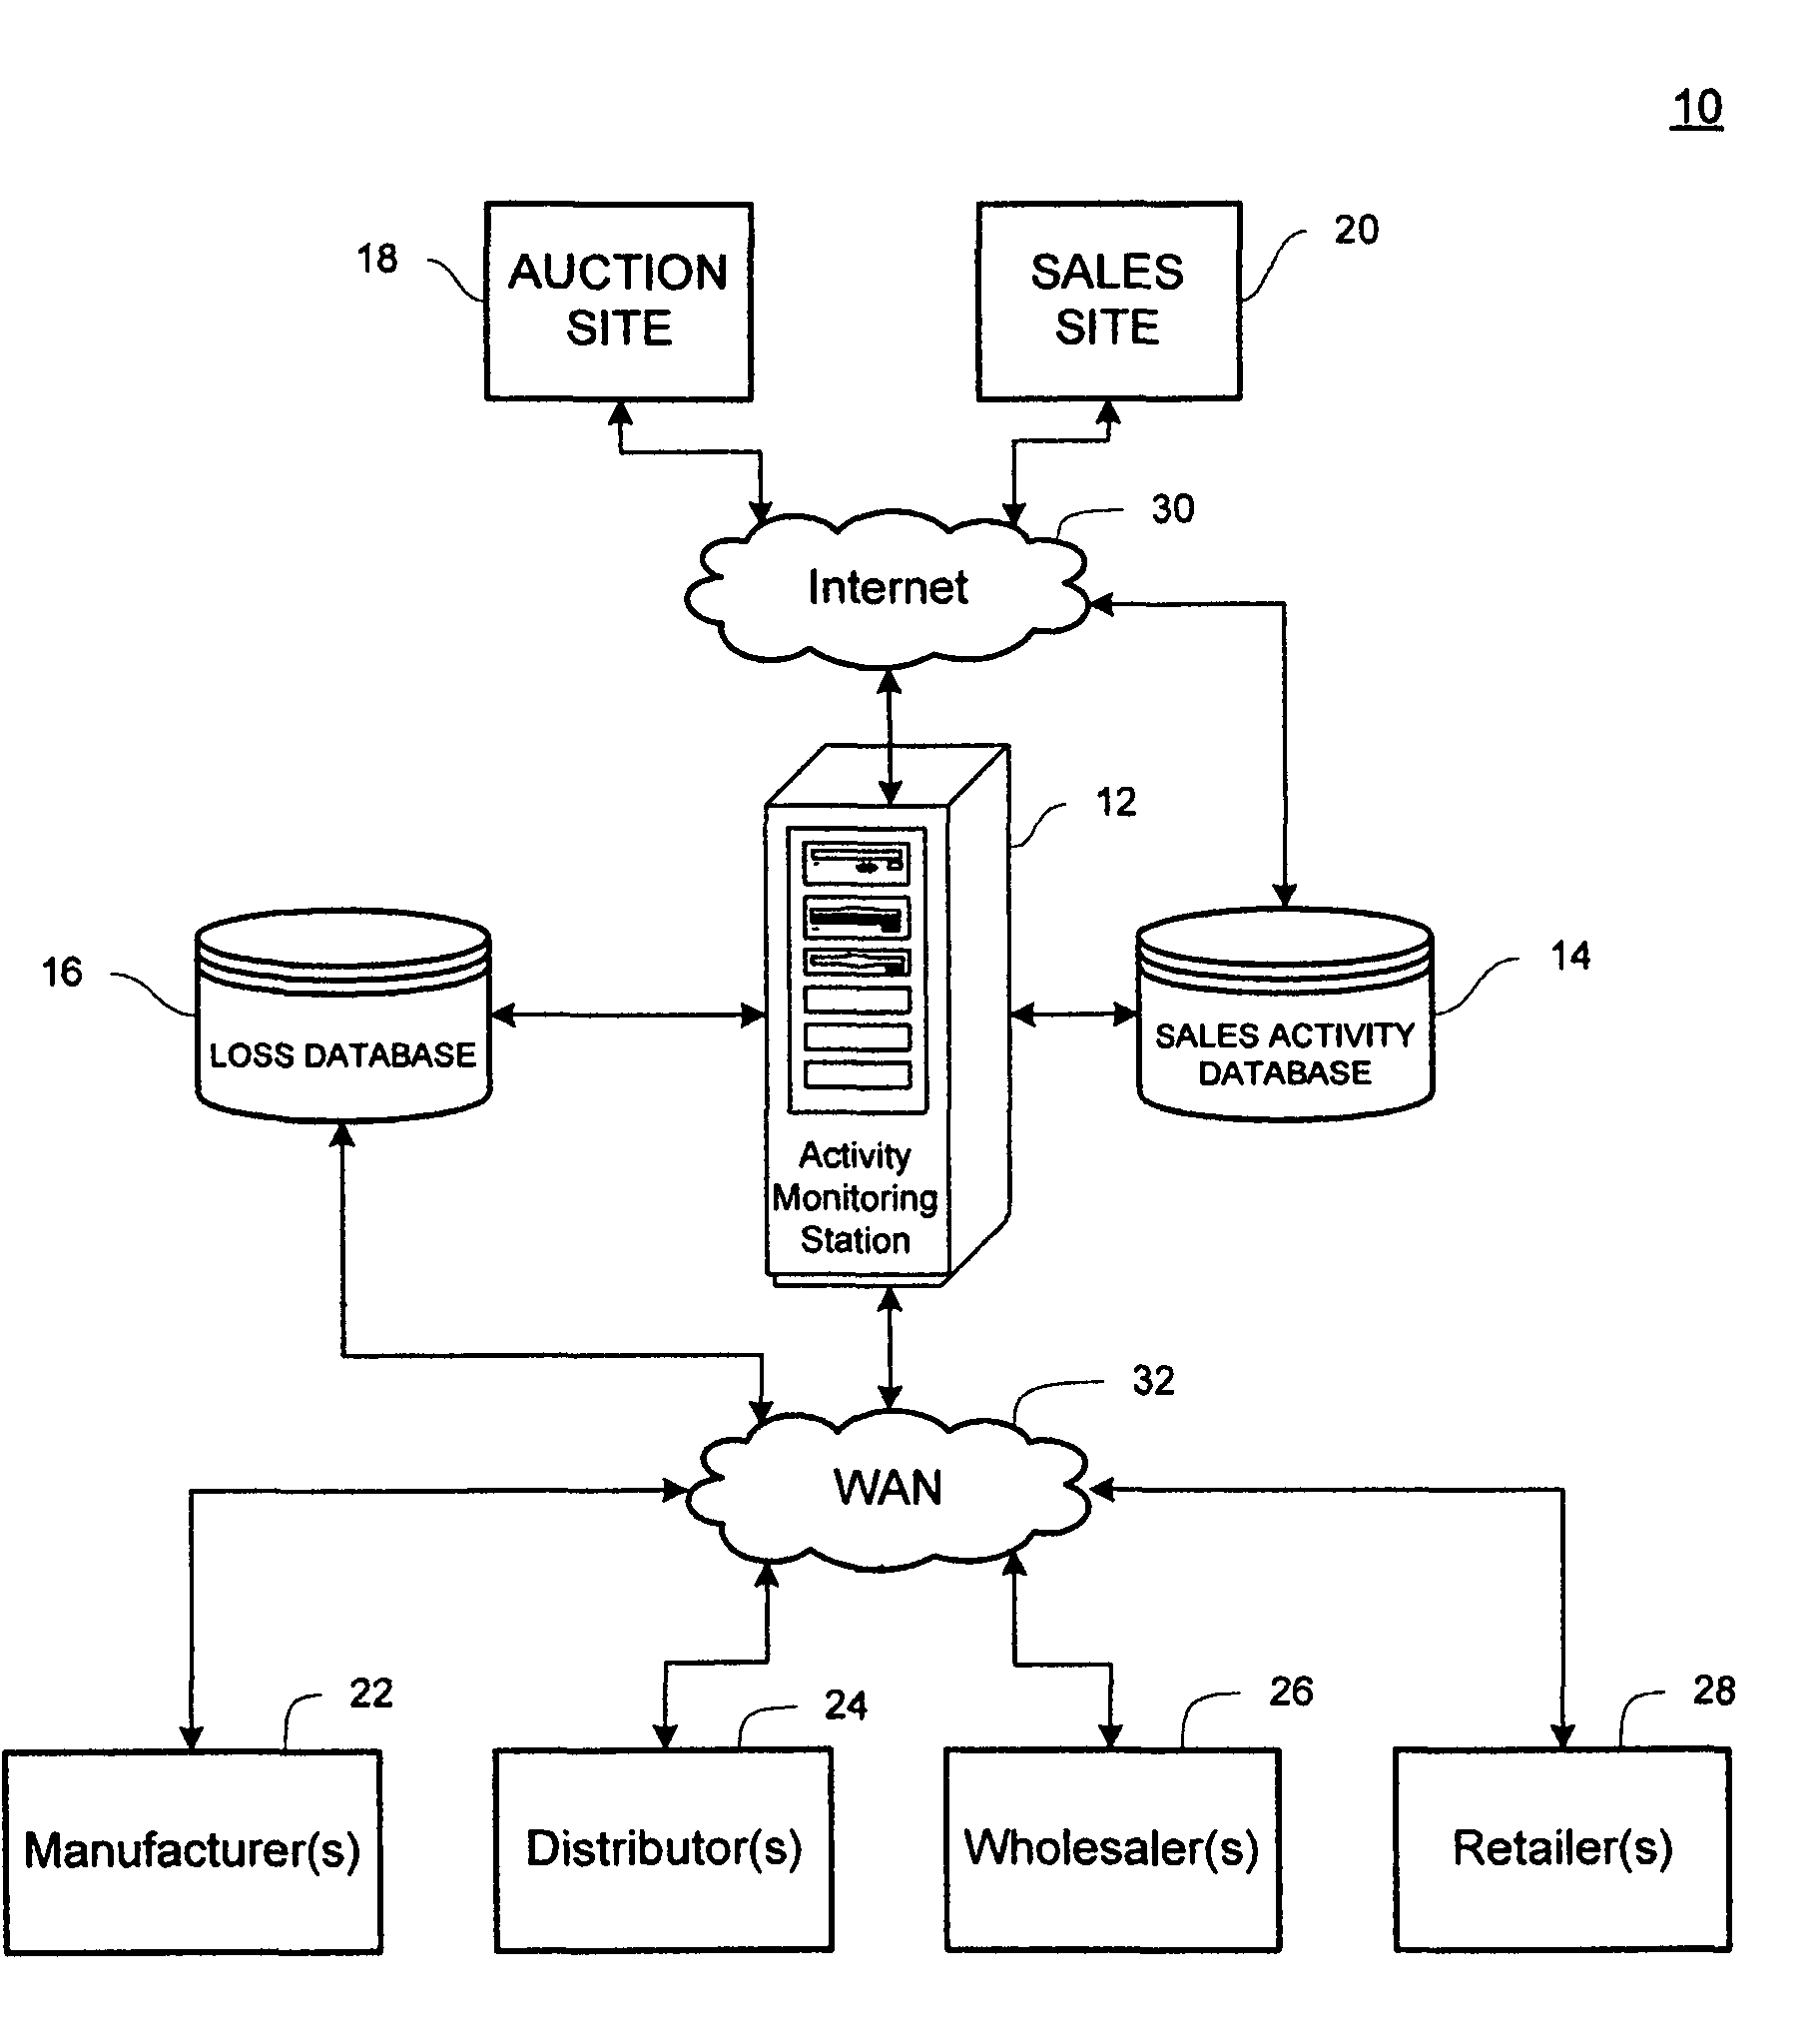 System and method for correlating supply chain theft with internet auction activity